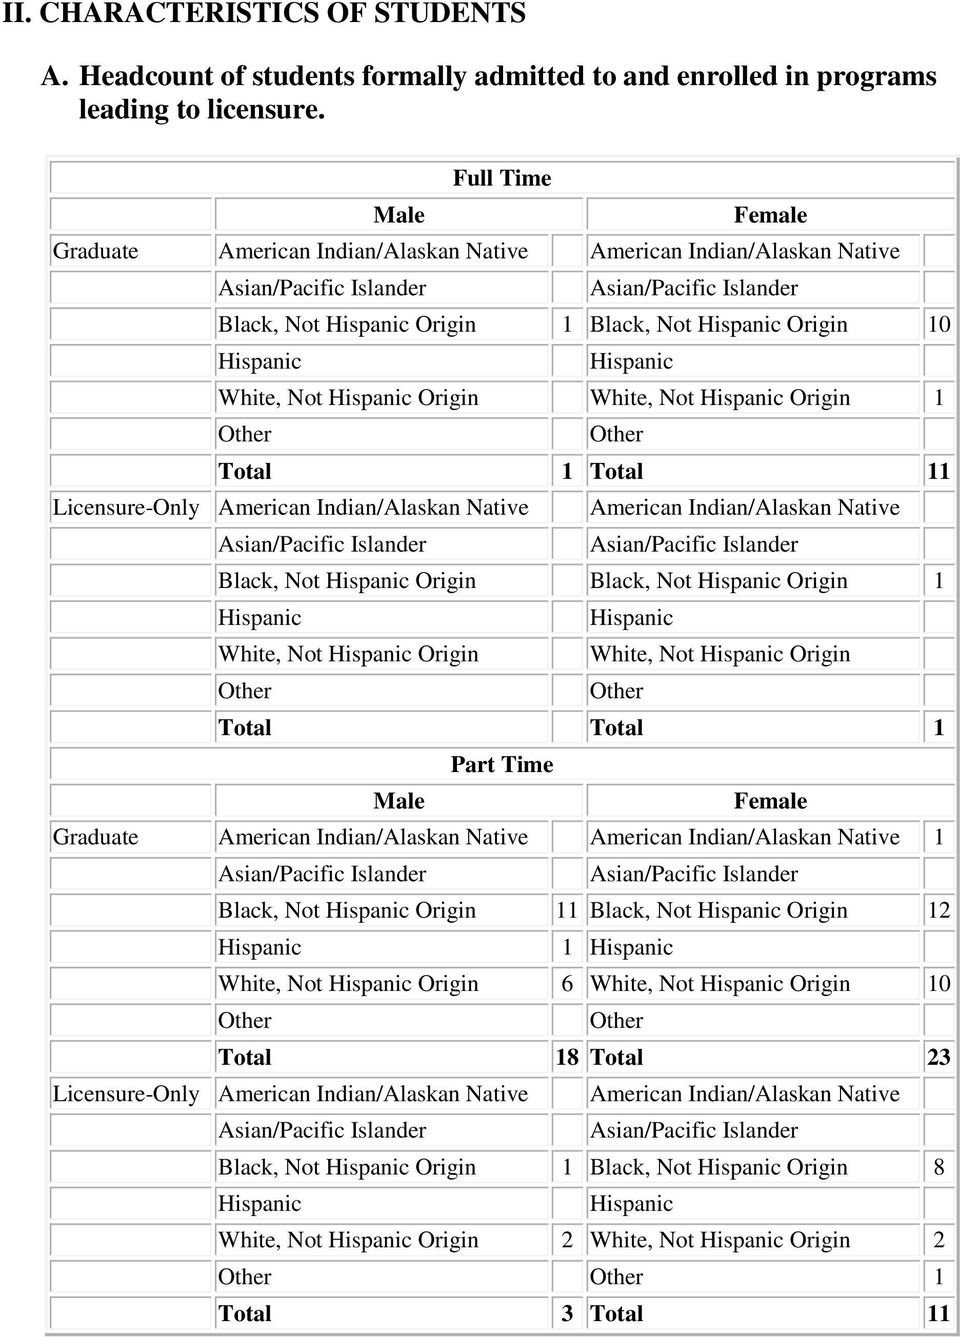 Licensure-Only American Indian/Alaskan Native American Indian/Alaskan Native Black, Not Origin Black, Not Origin 1 White, Not Origin White, Not Origin Total Total 1 Part Time Male Female Graduate